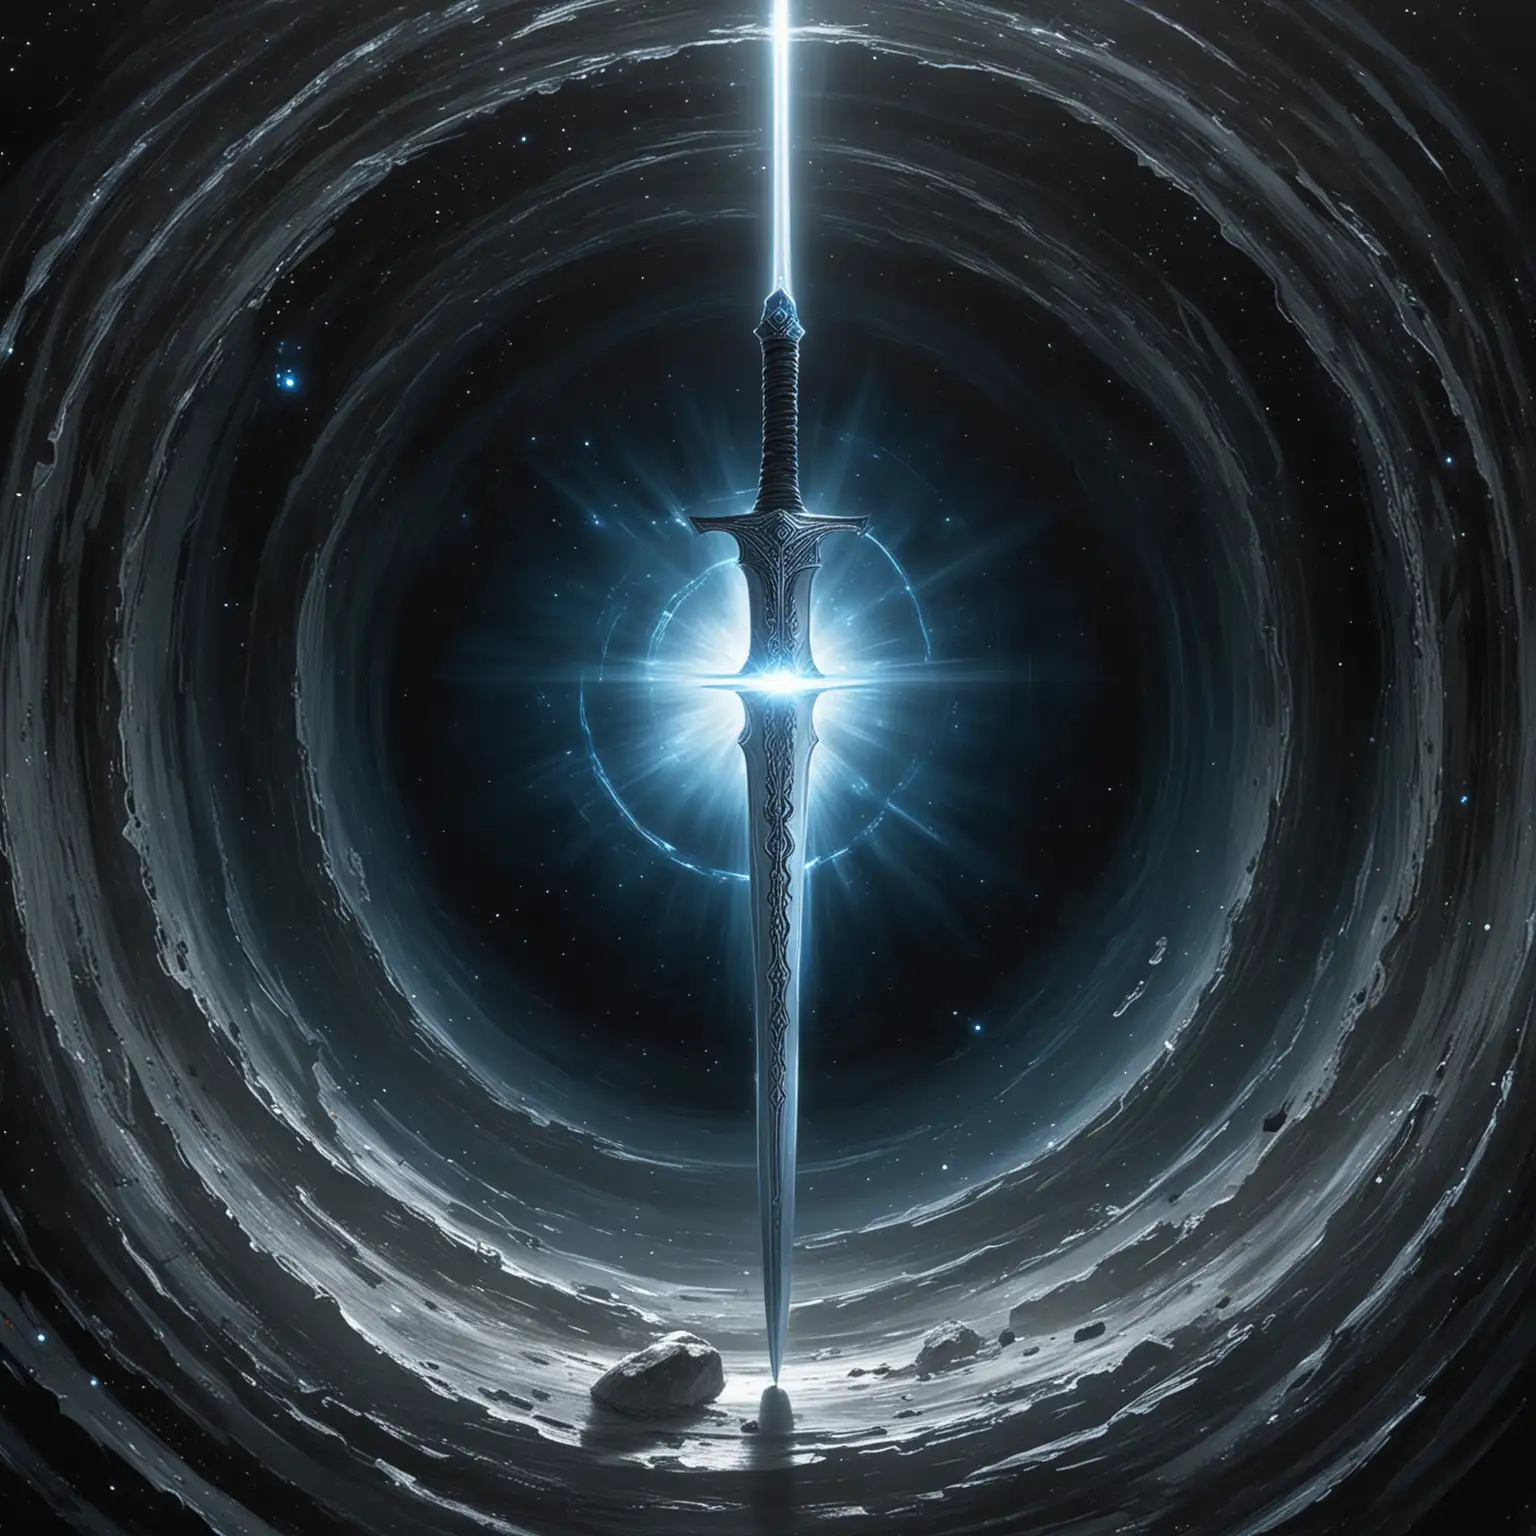 SilverBlue-Light-Pierces-Black-Hole-with-Silver-Sword